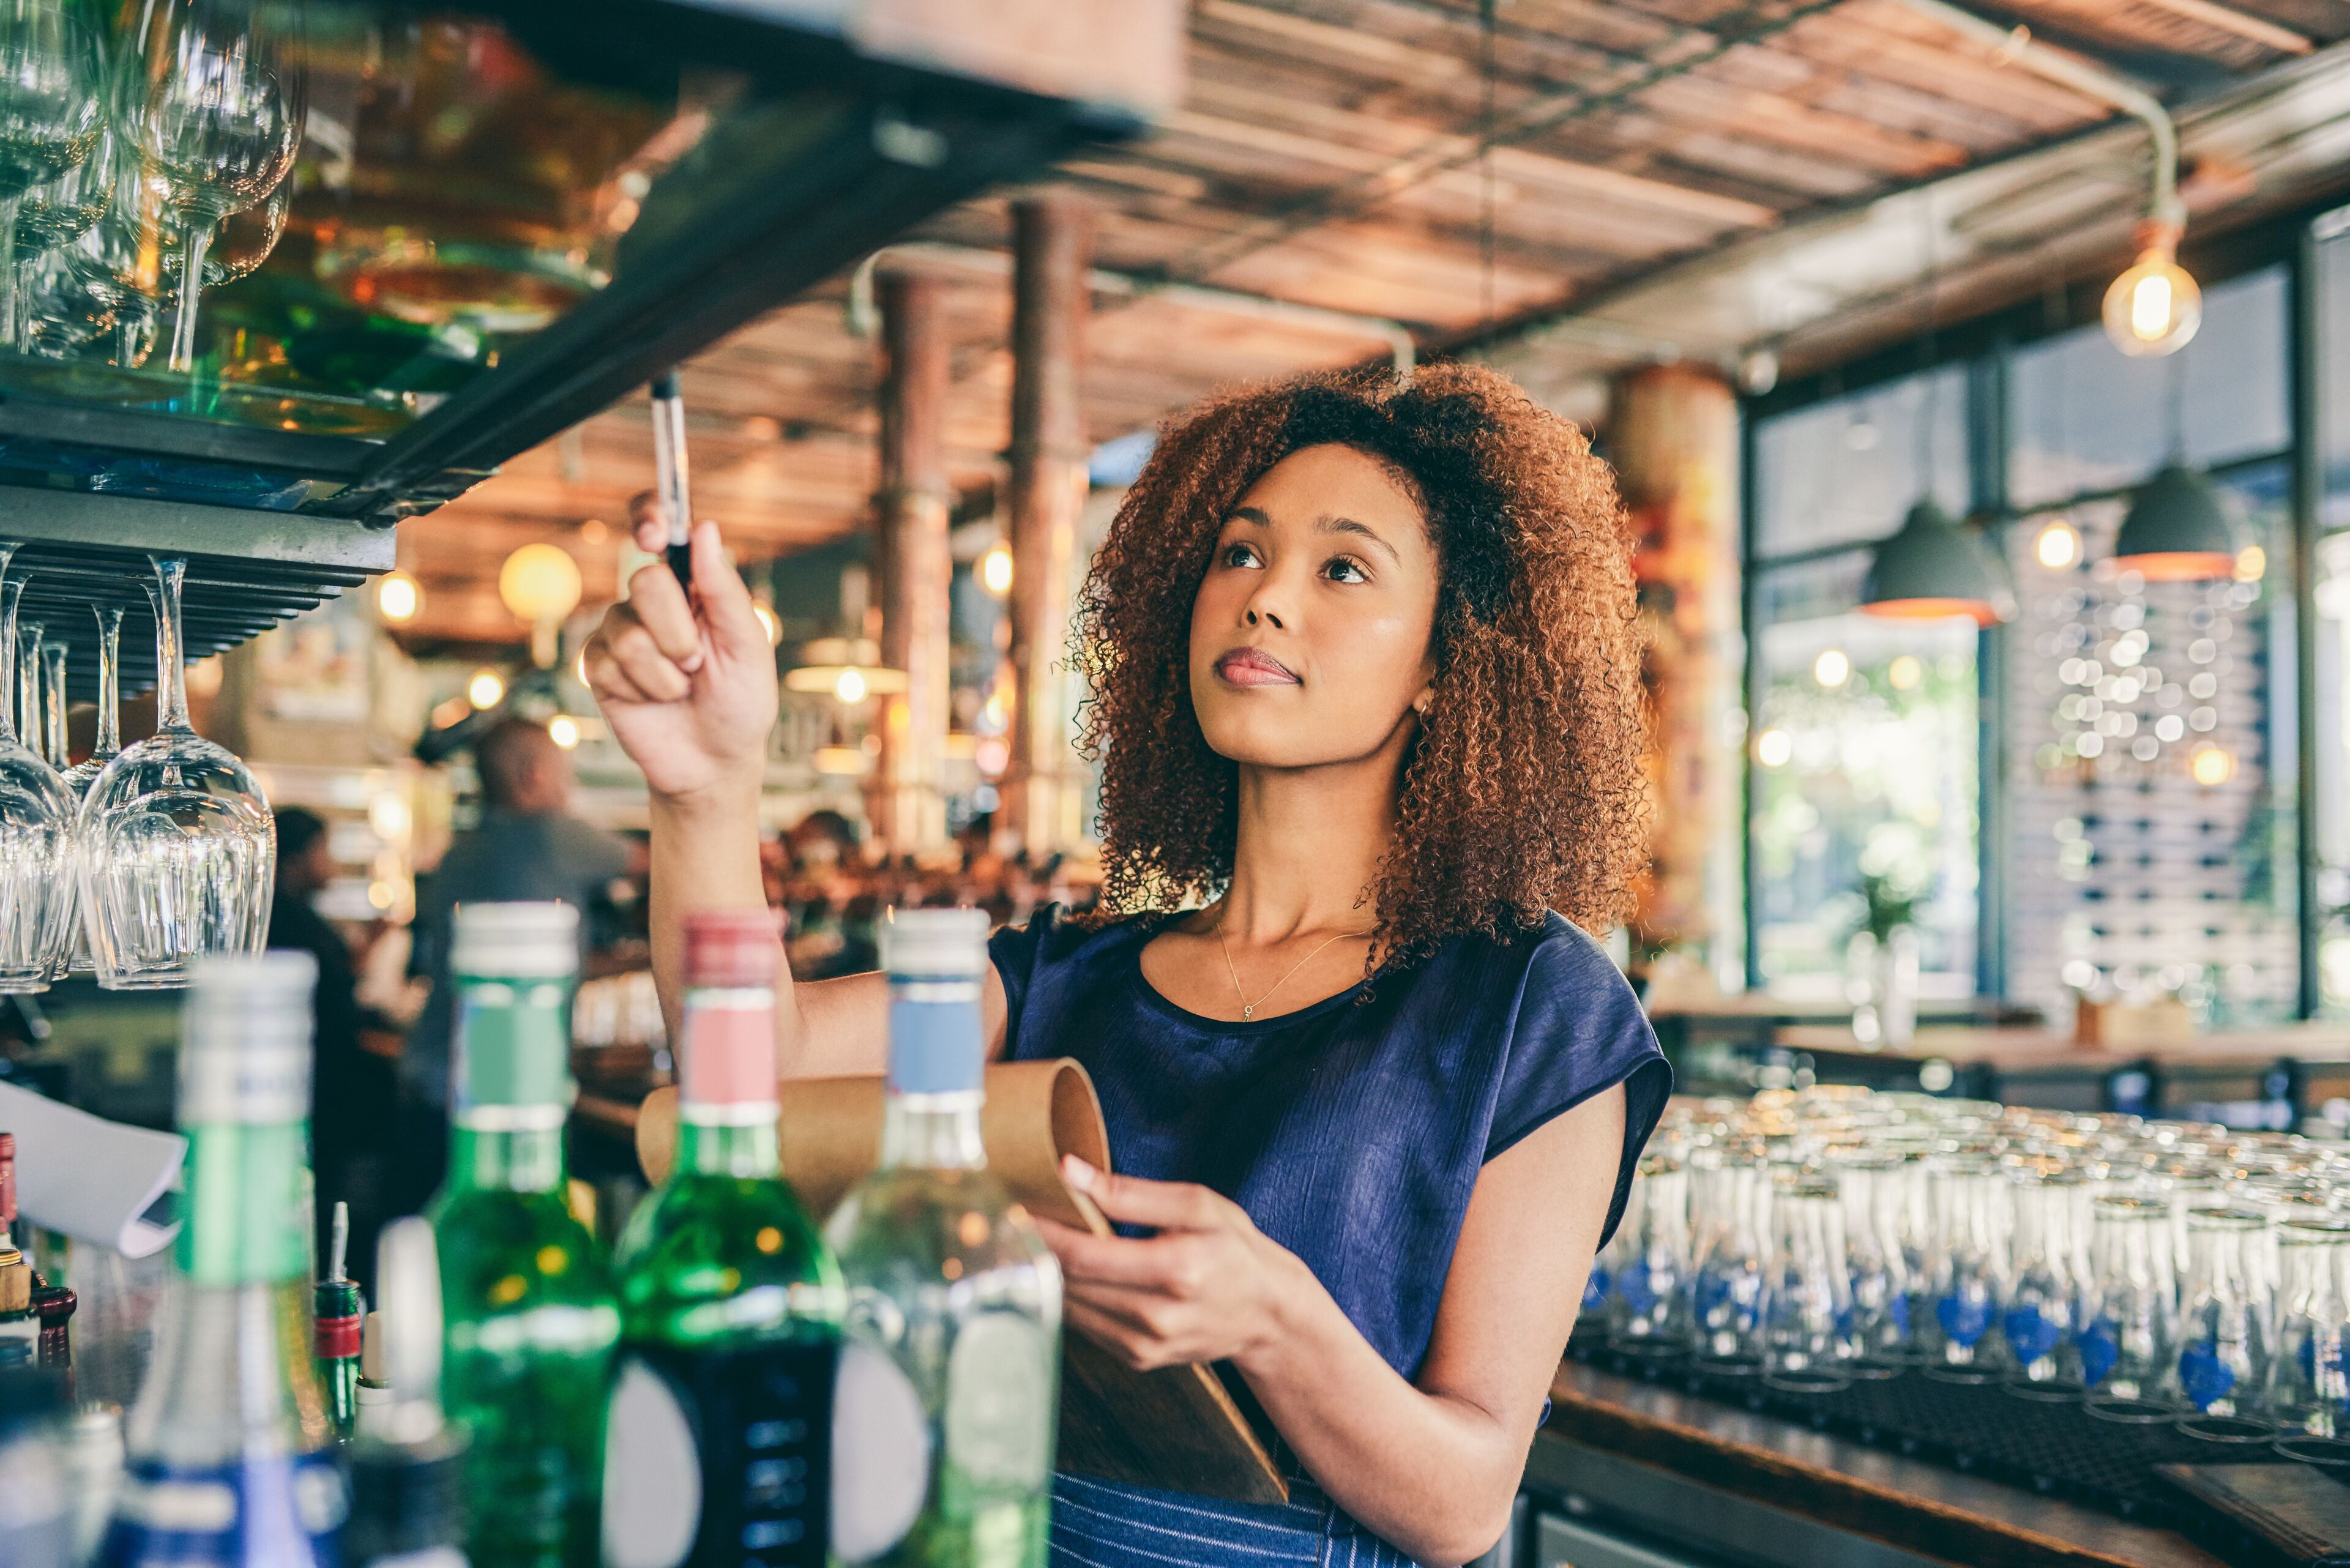 ImageA thoughtful female bartender with curly hair is poised to take a customer's order in a bustling bar.